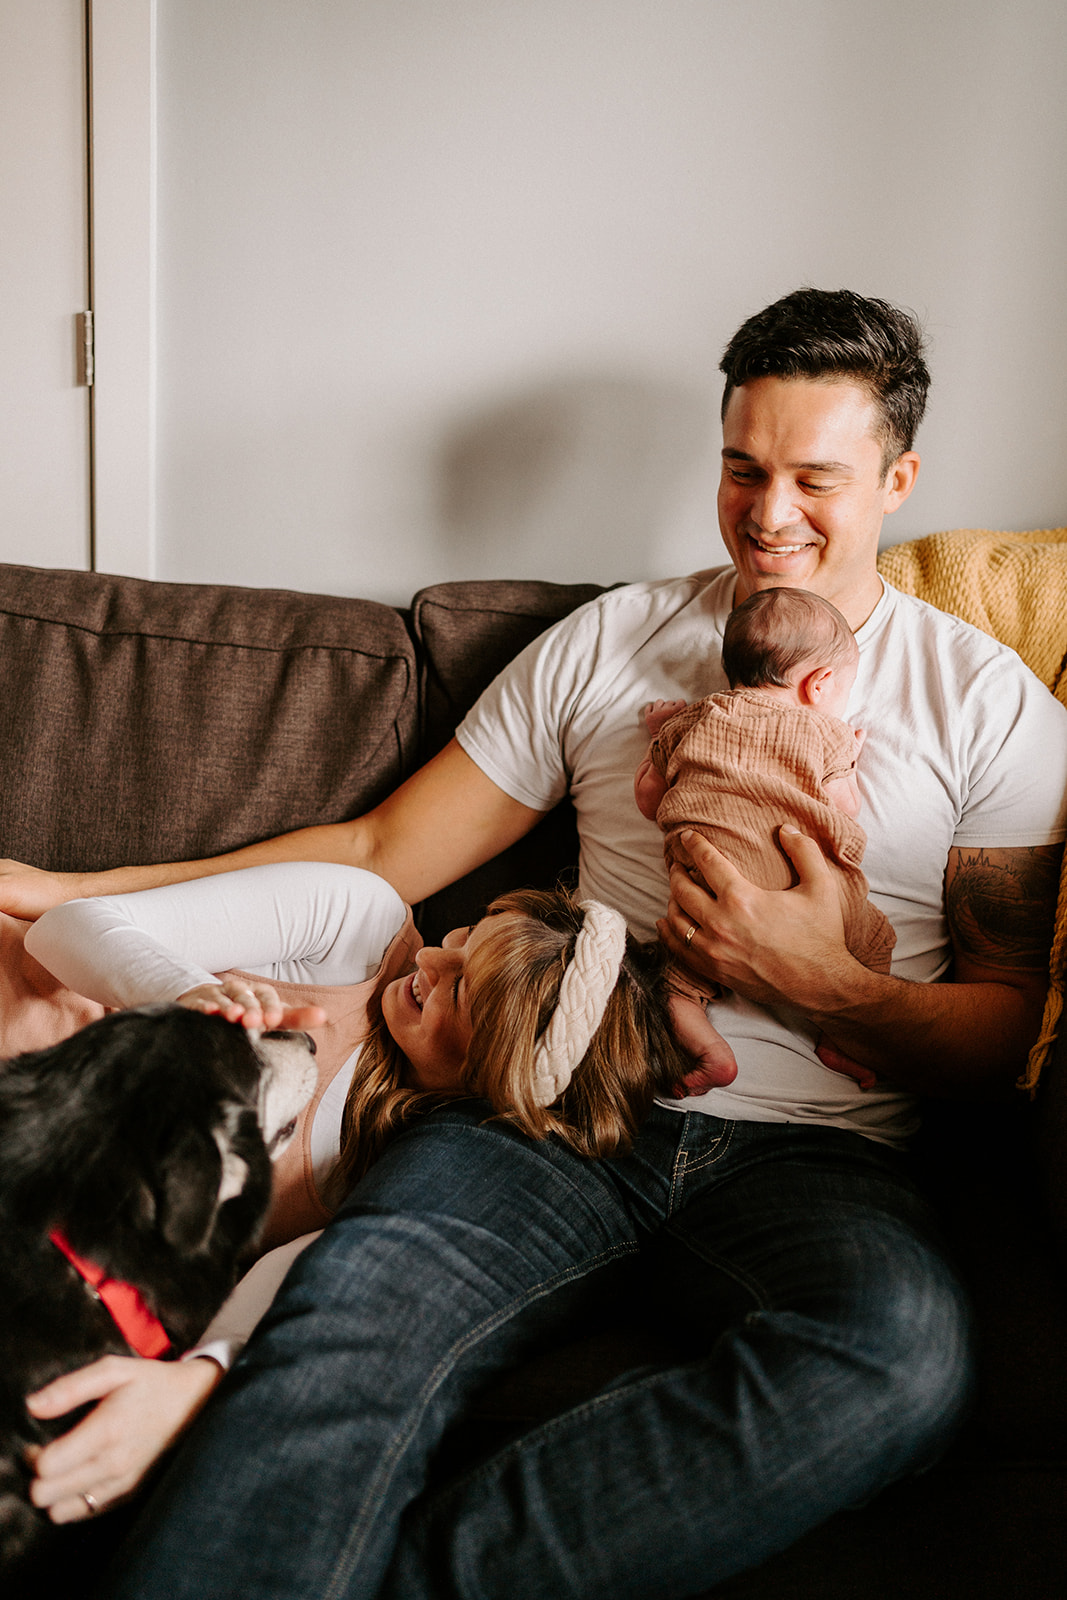 Indoor family newborn session while couple smiles together with newborn and dog